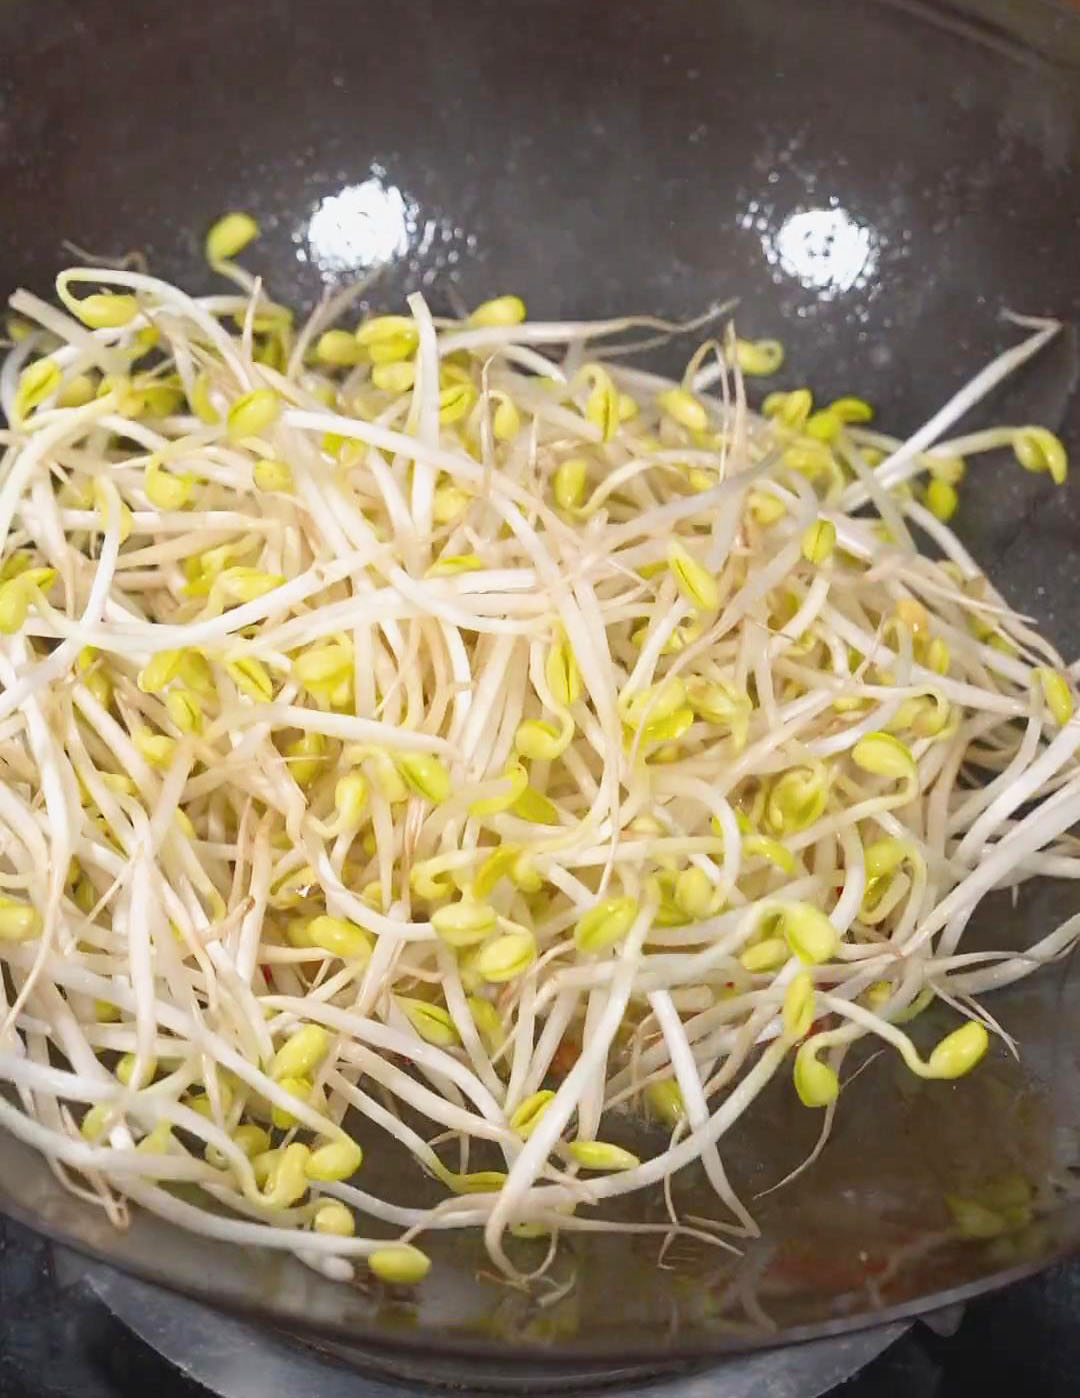 Add bean sprouts and stir fry until softened